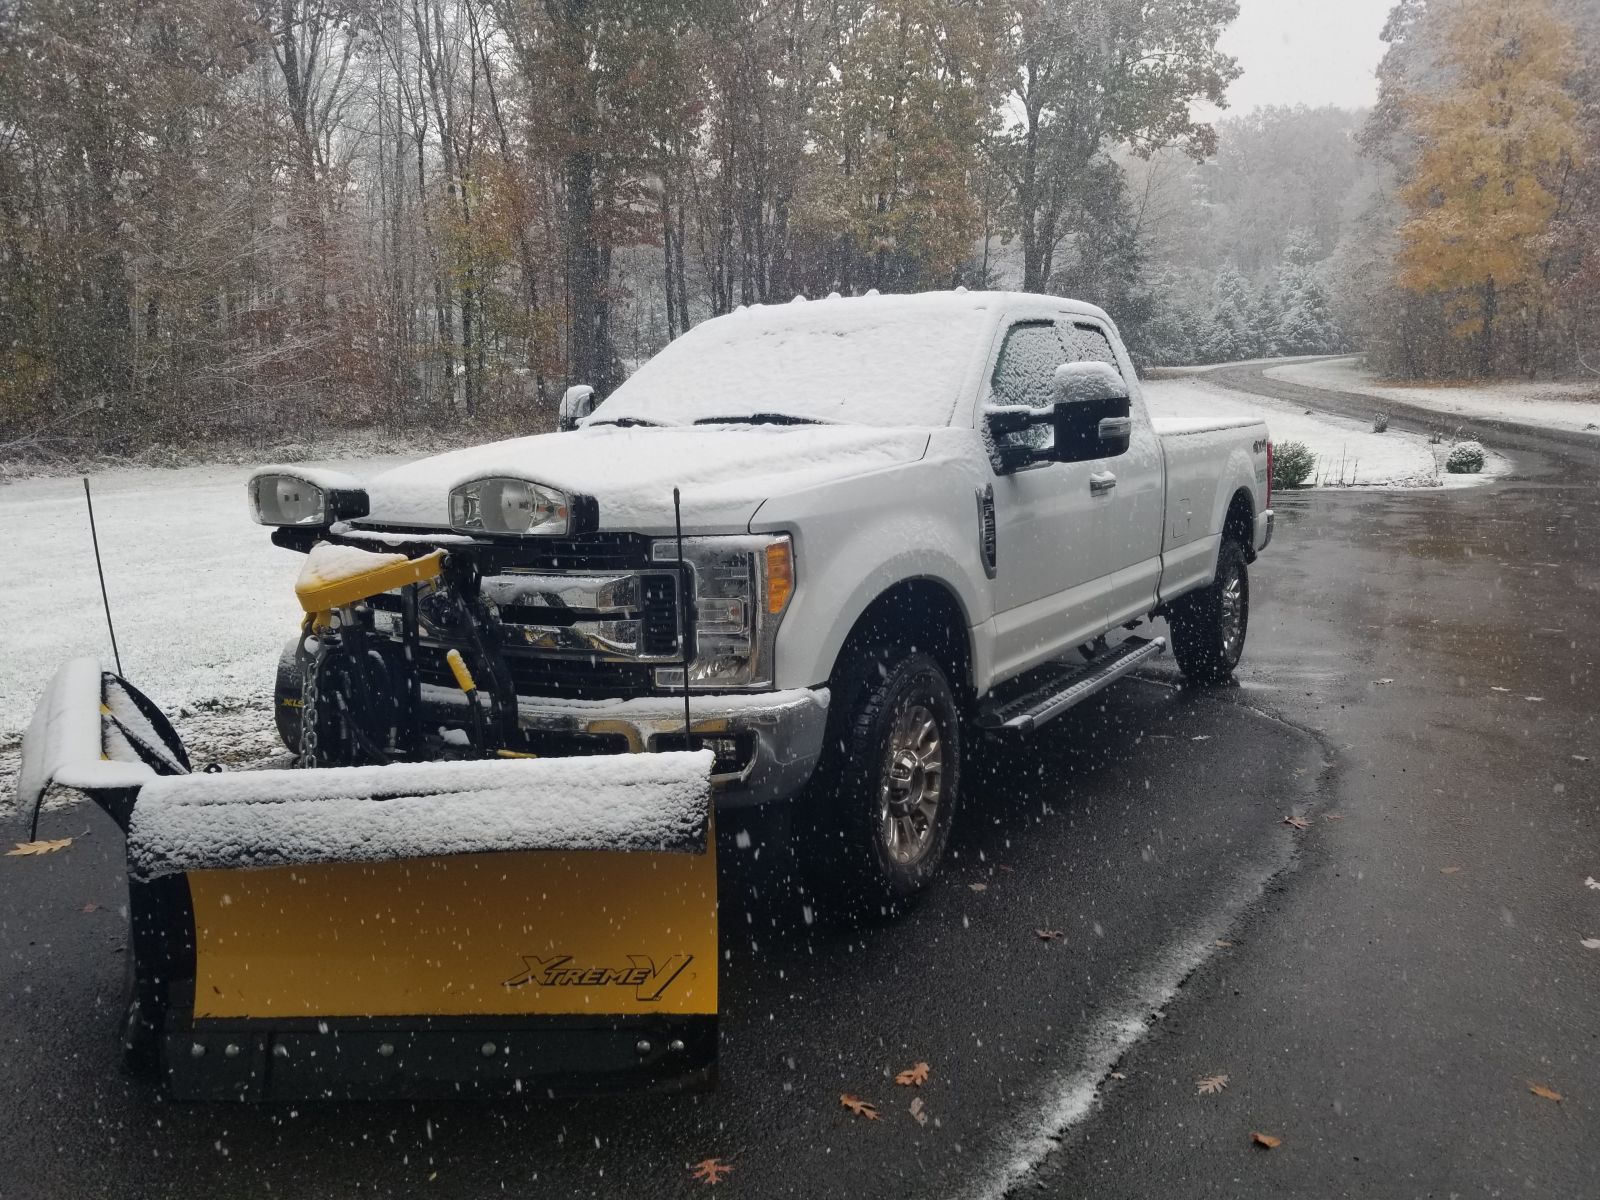 Plow is super easy to put on and off. 